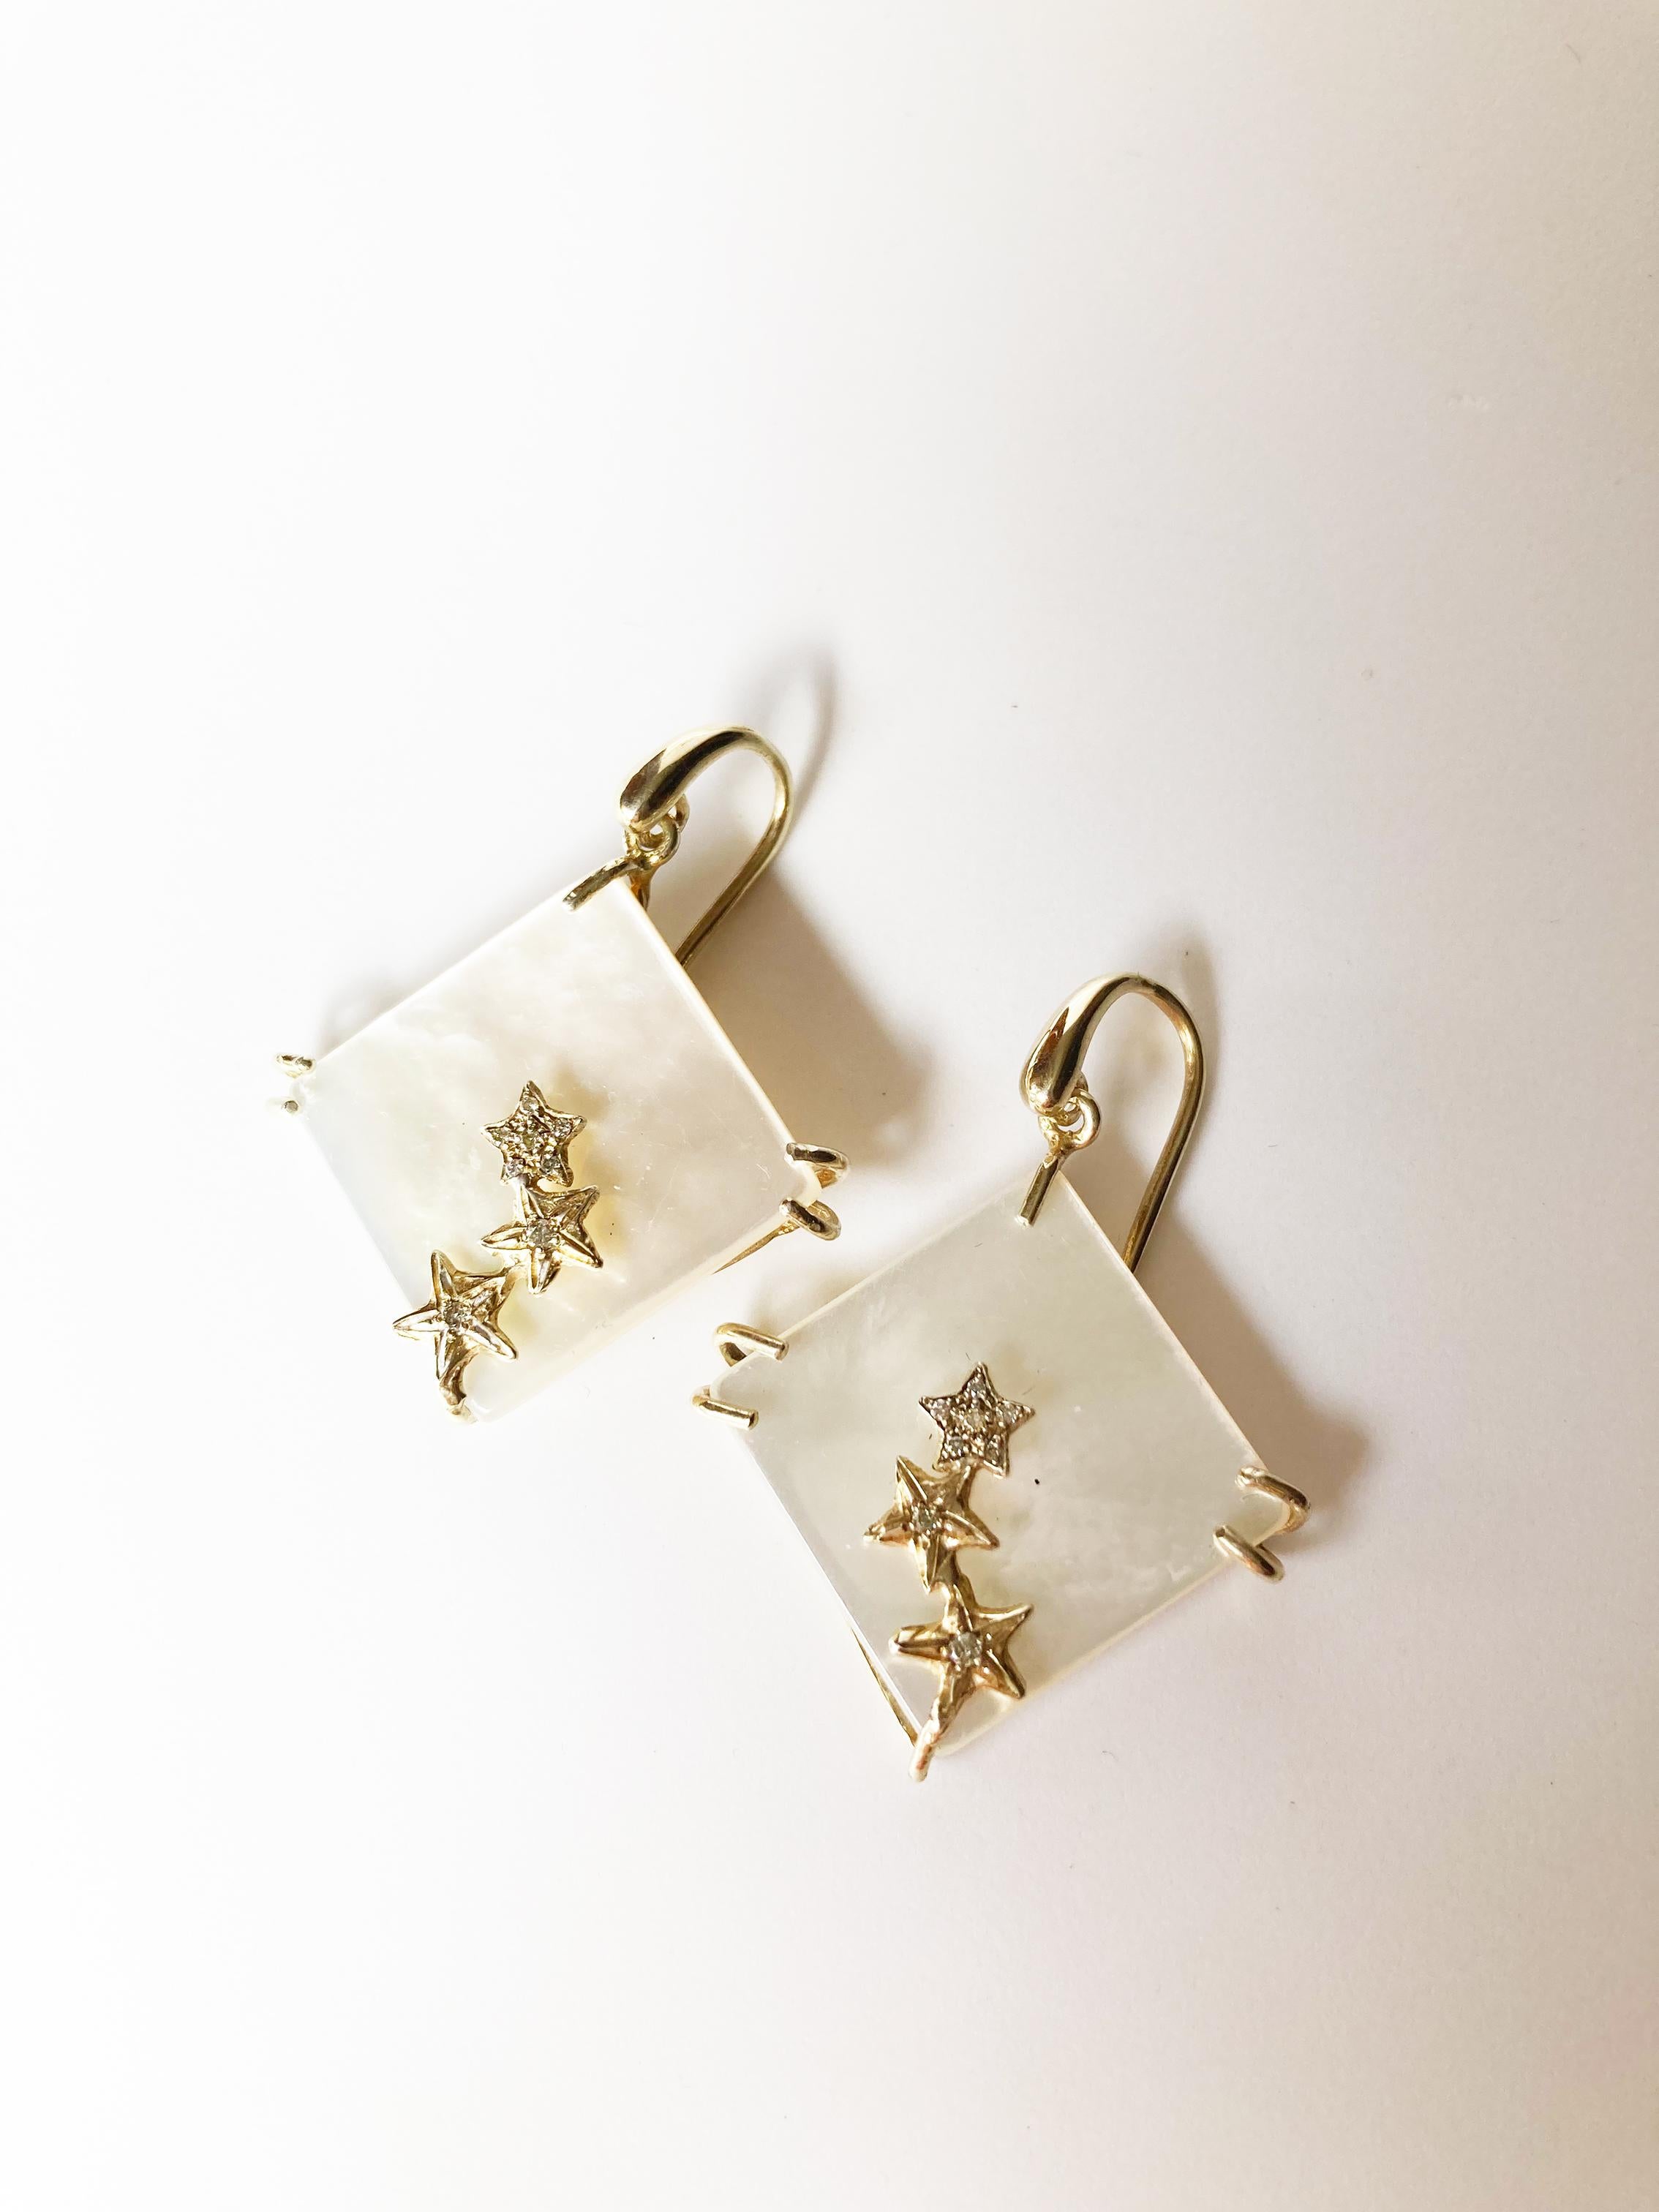 Artisan 18K Gold Earrings Gray Diamonds Stars Handcrafted Italy by Rossella Ugolini  For Sale